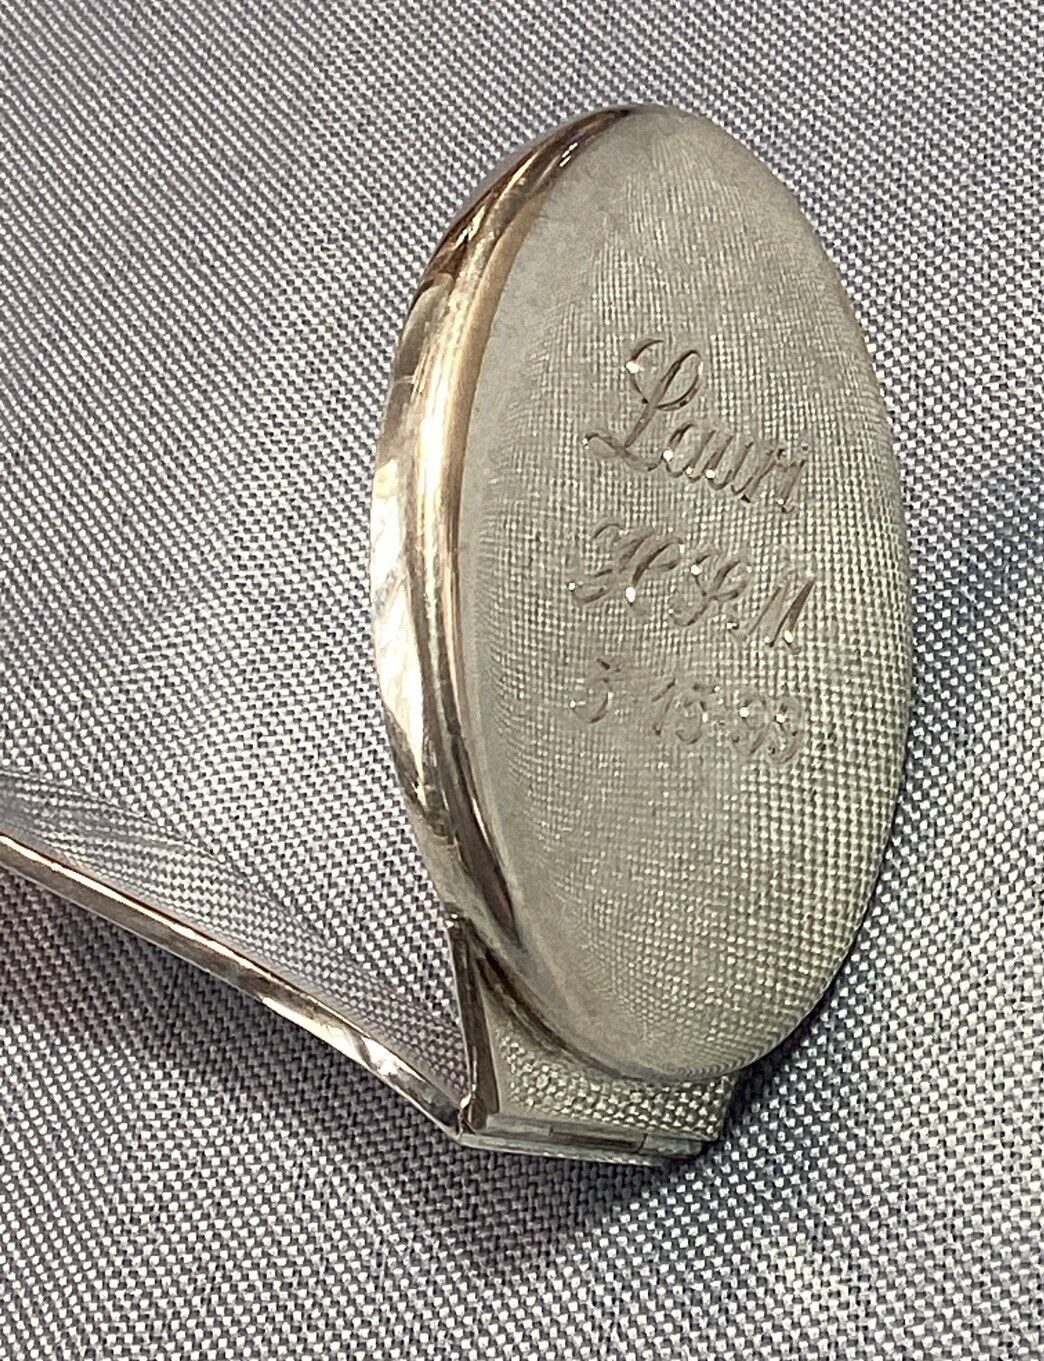 Tiffany & Co Sterling Silver Folding Compact Mirror “ Engraved”